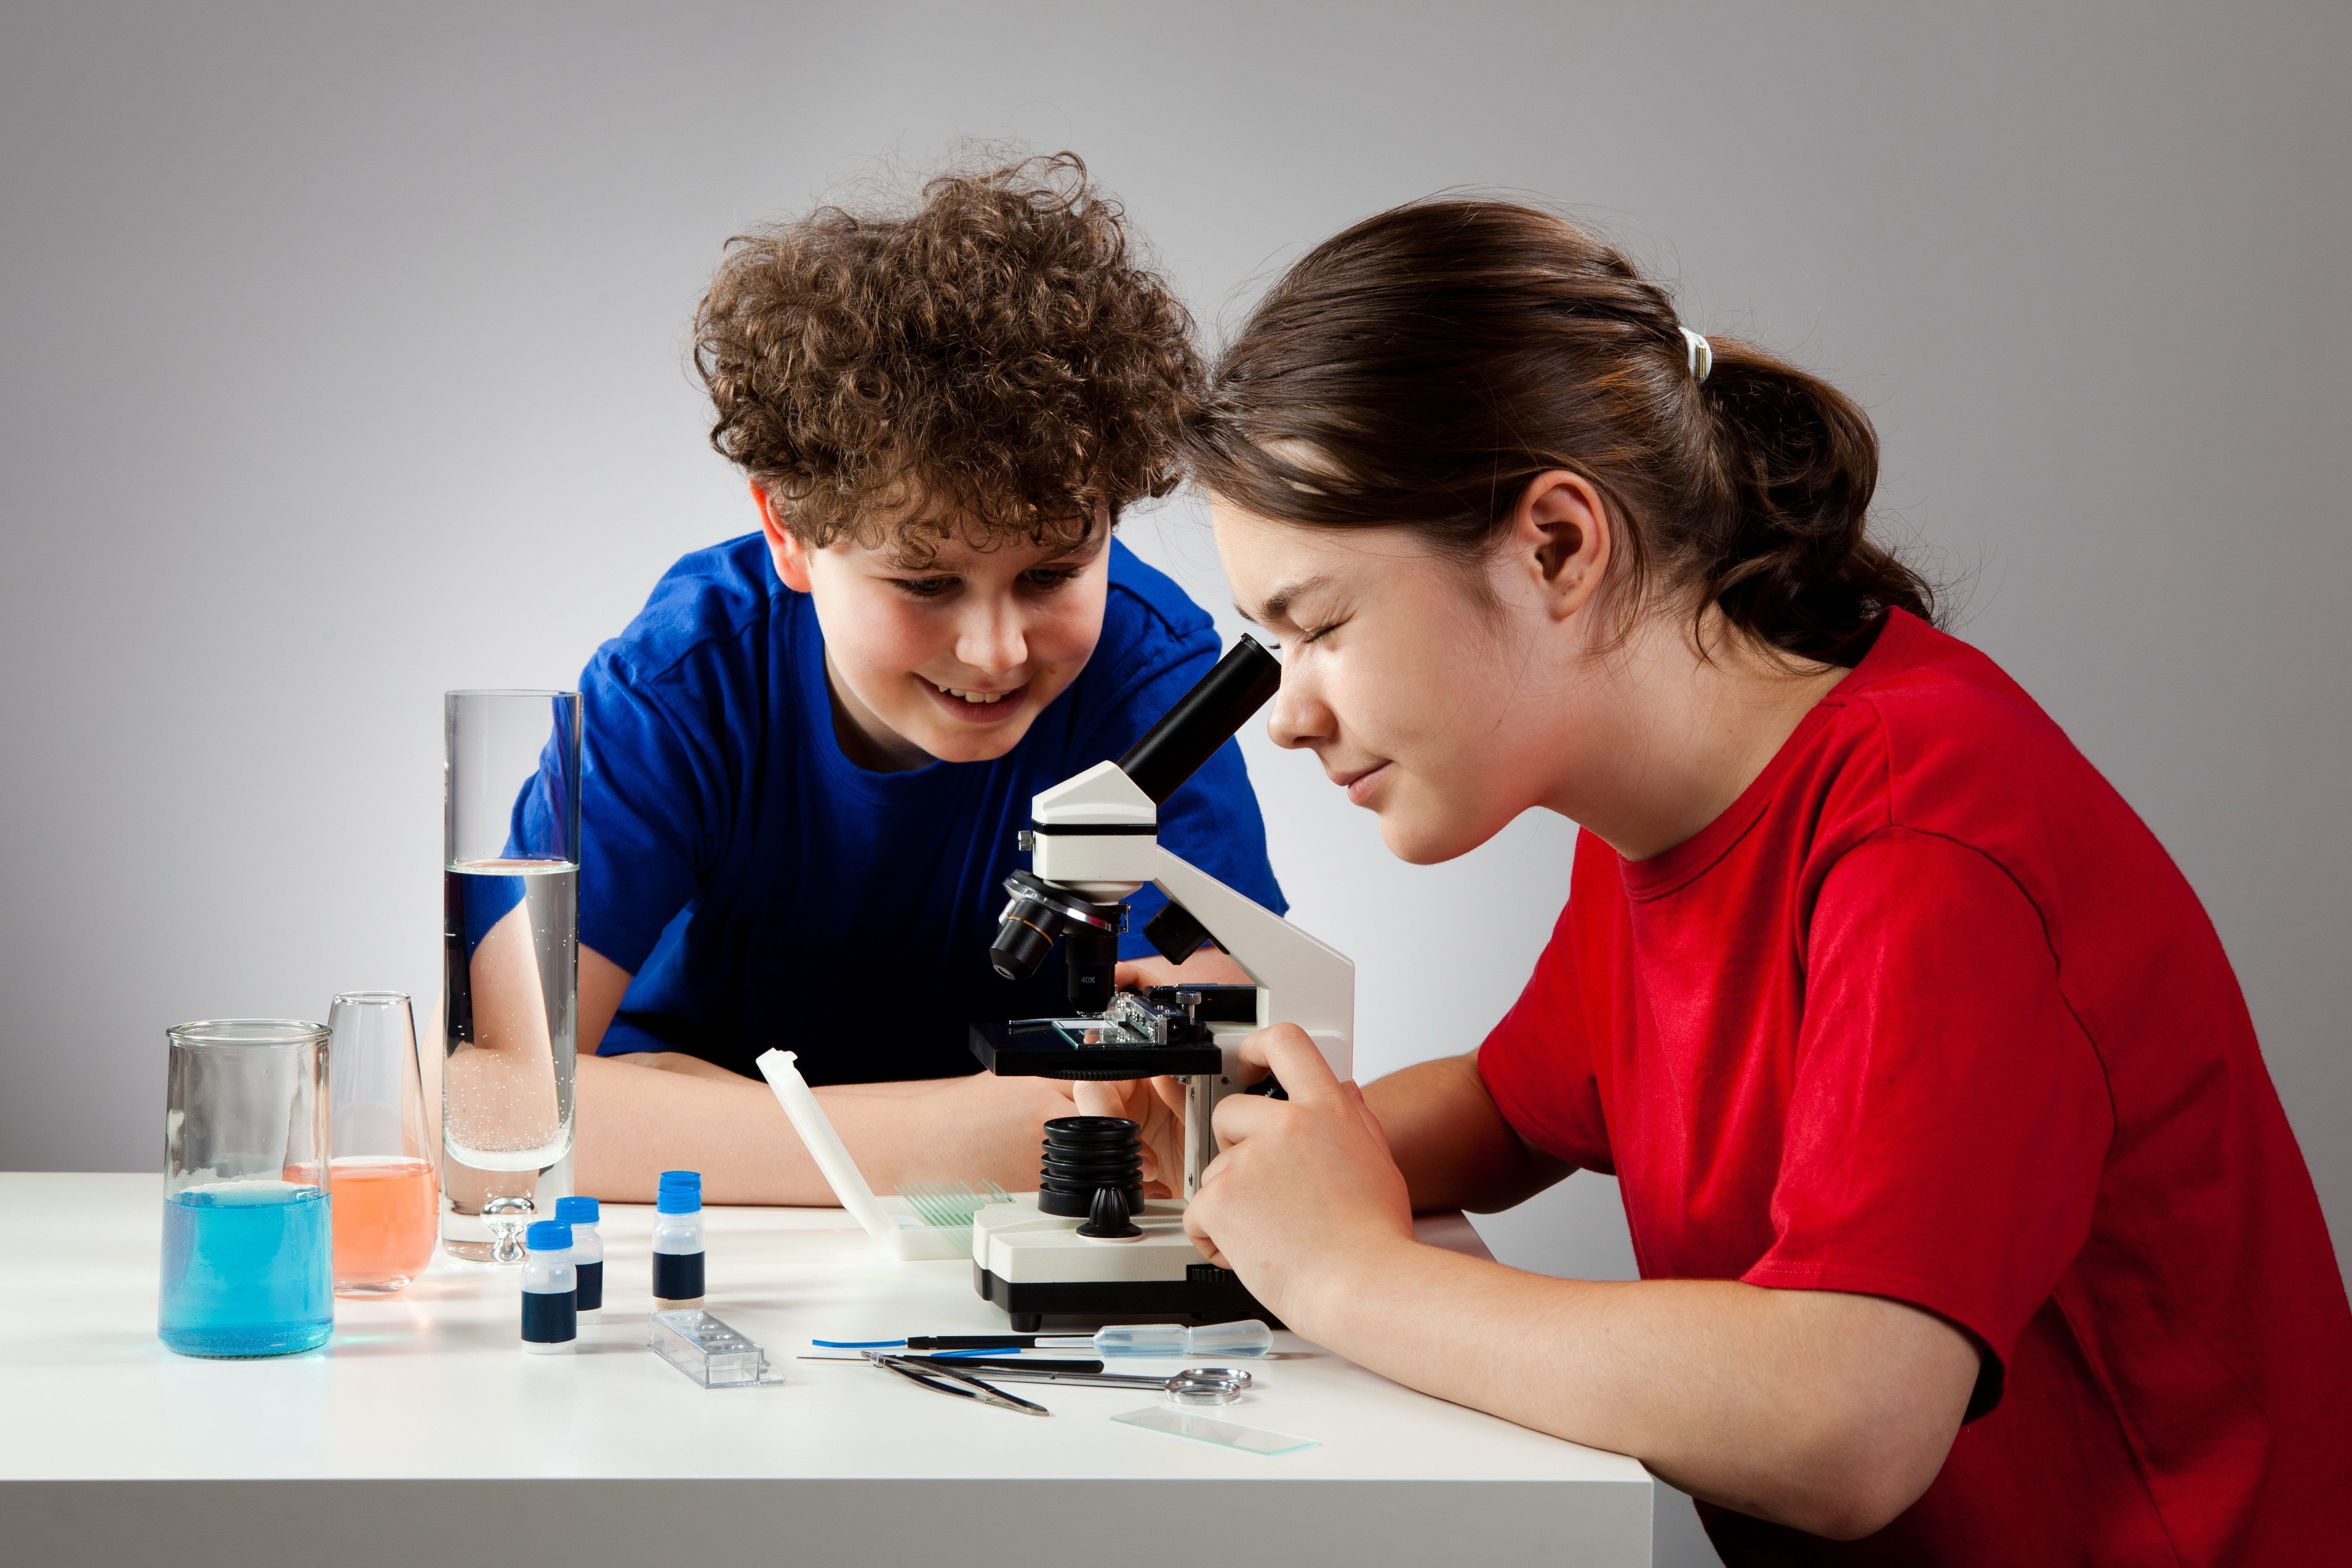 Best microscopes for schoolchildren and students in 2020